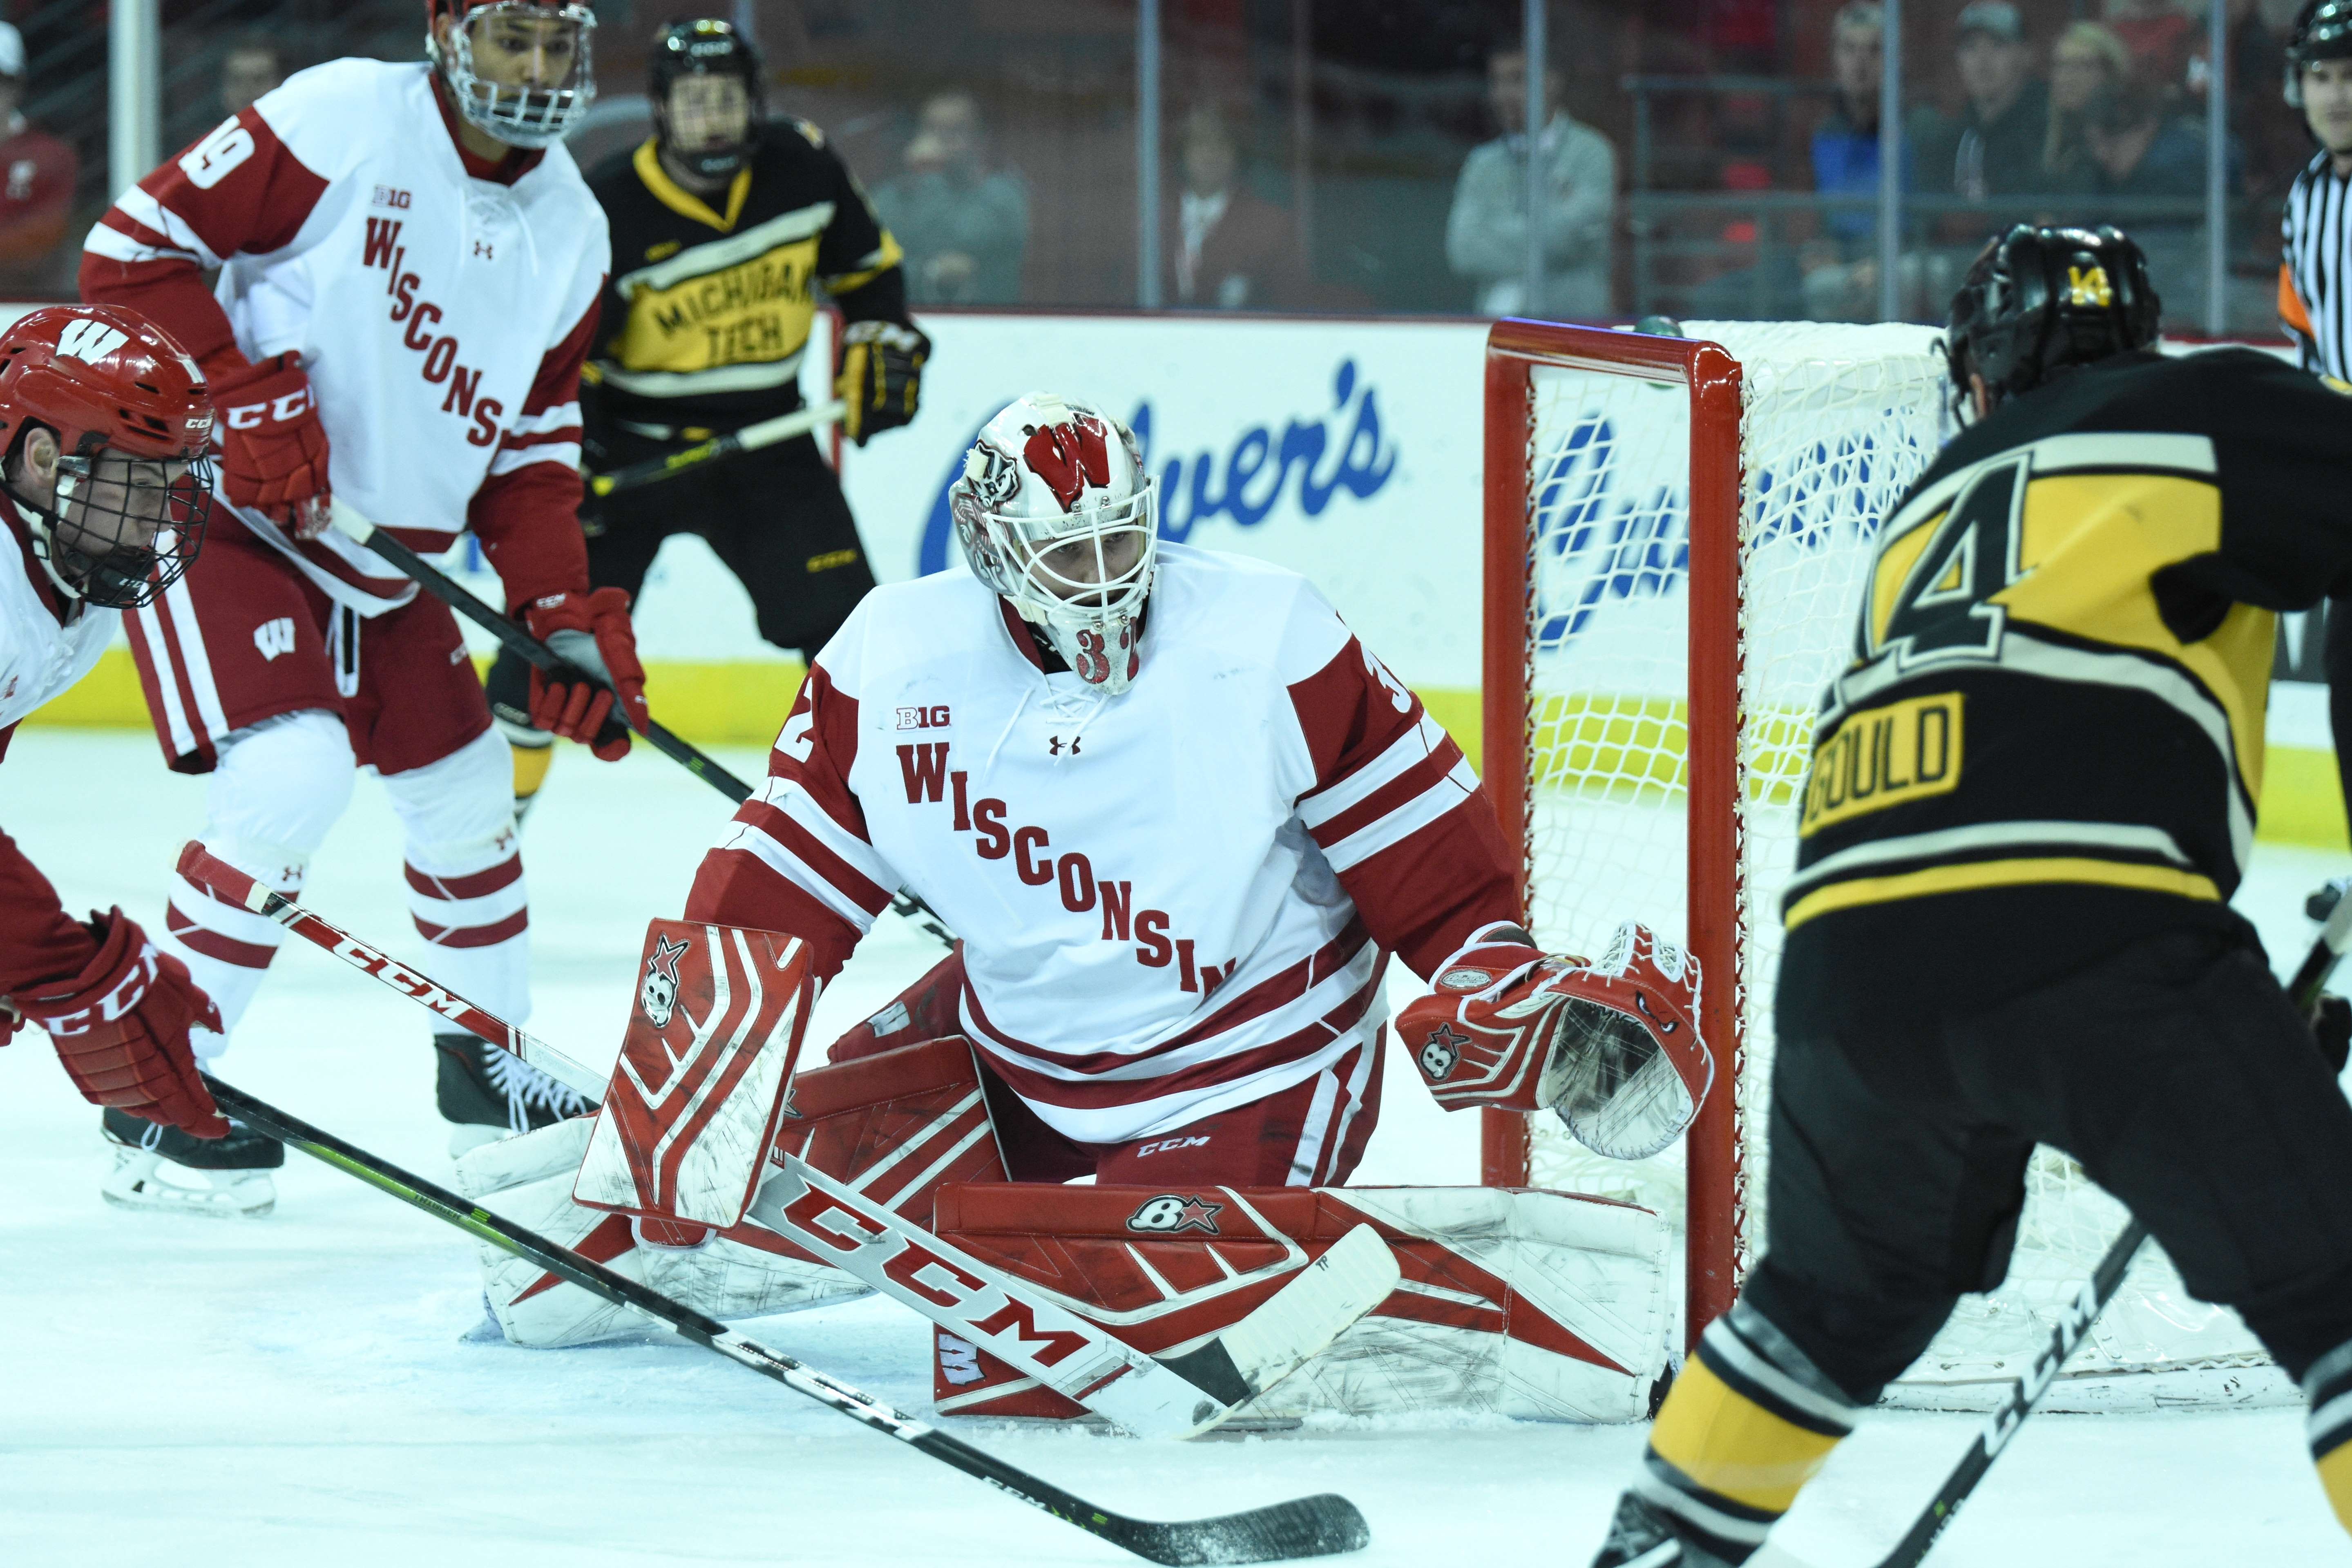 Men’s Hockey Badgers to face ranked opponent Fighting Hawks